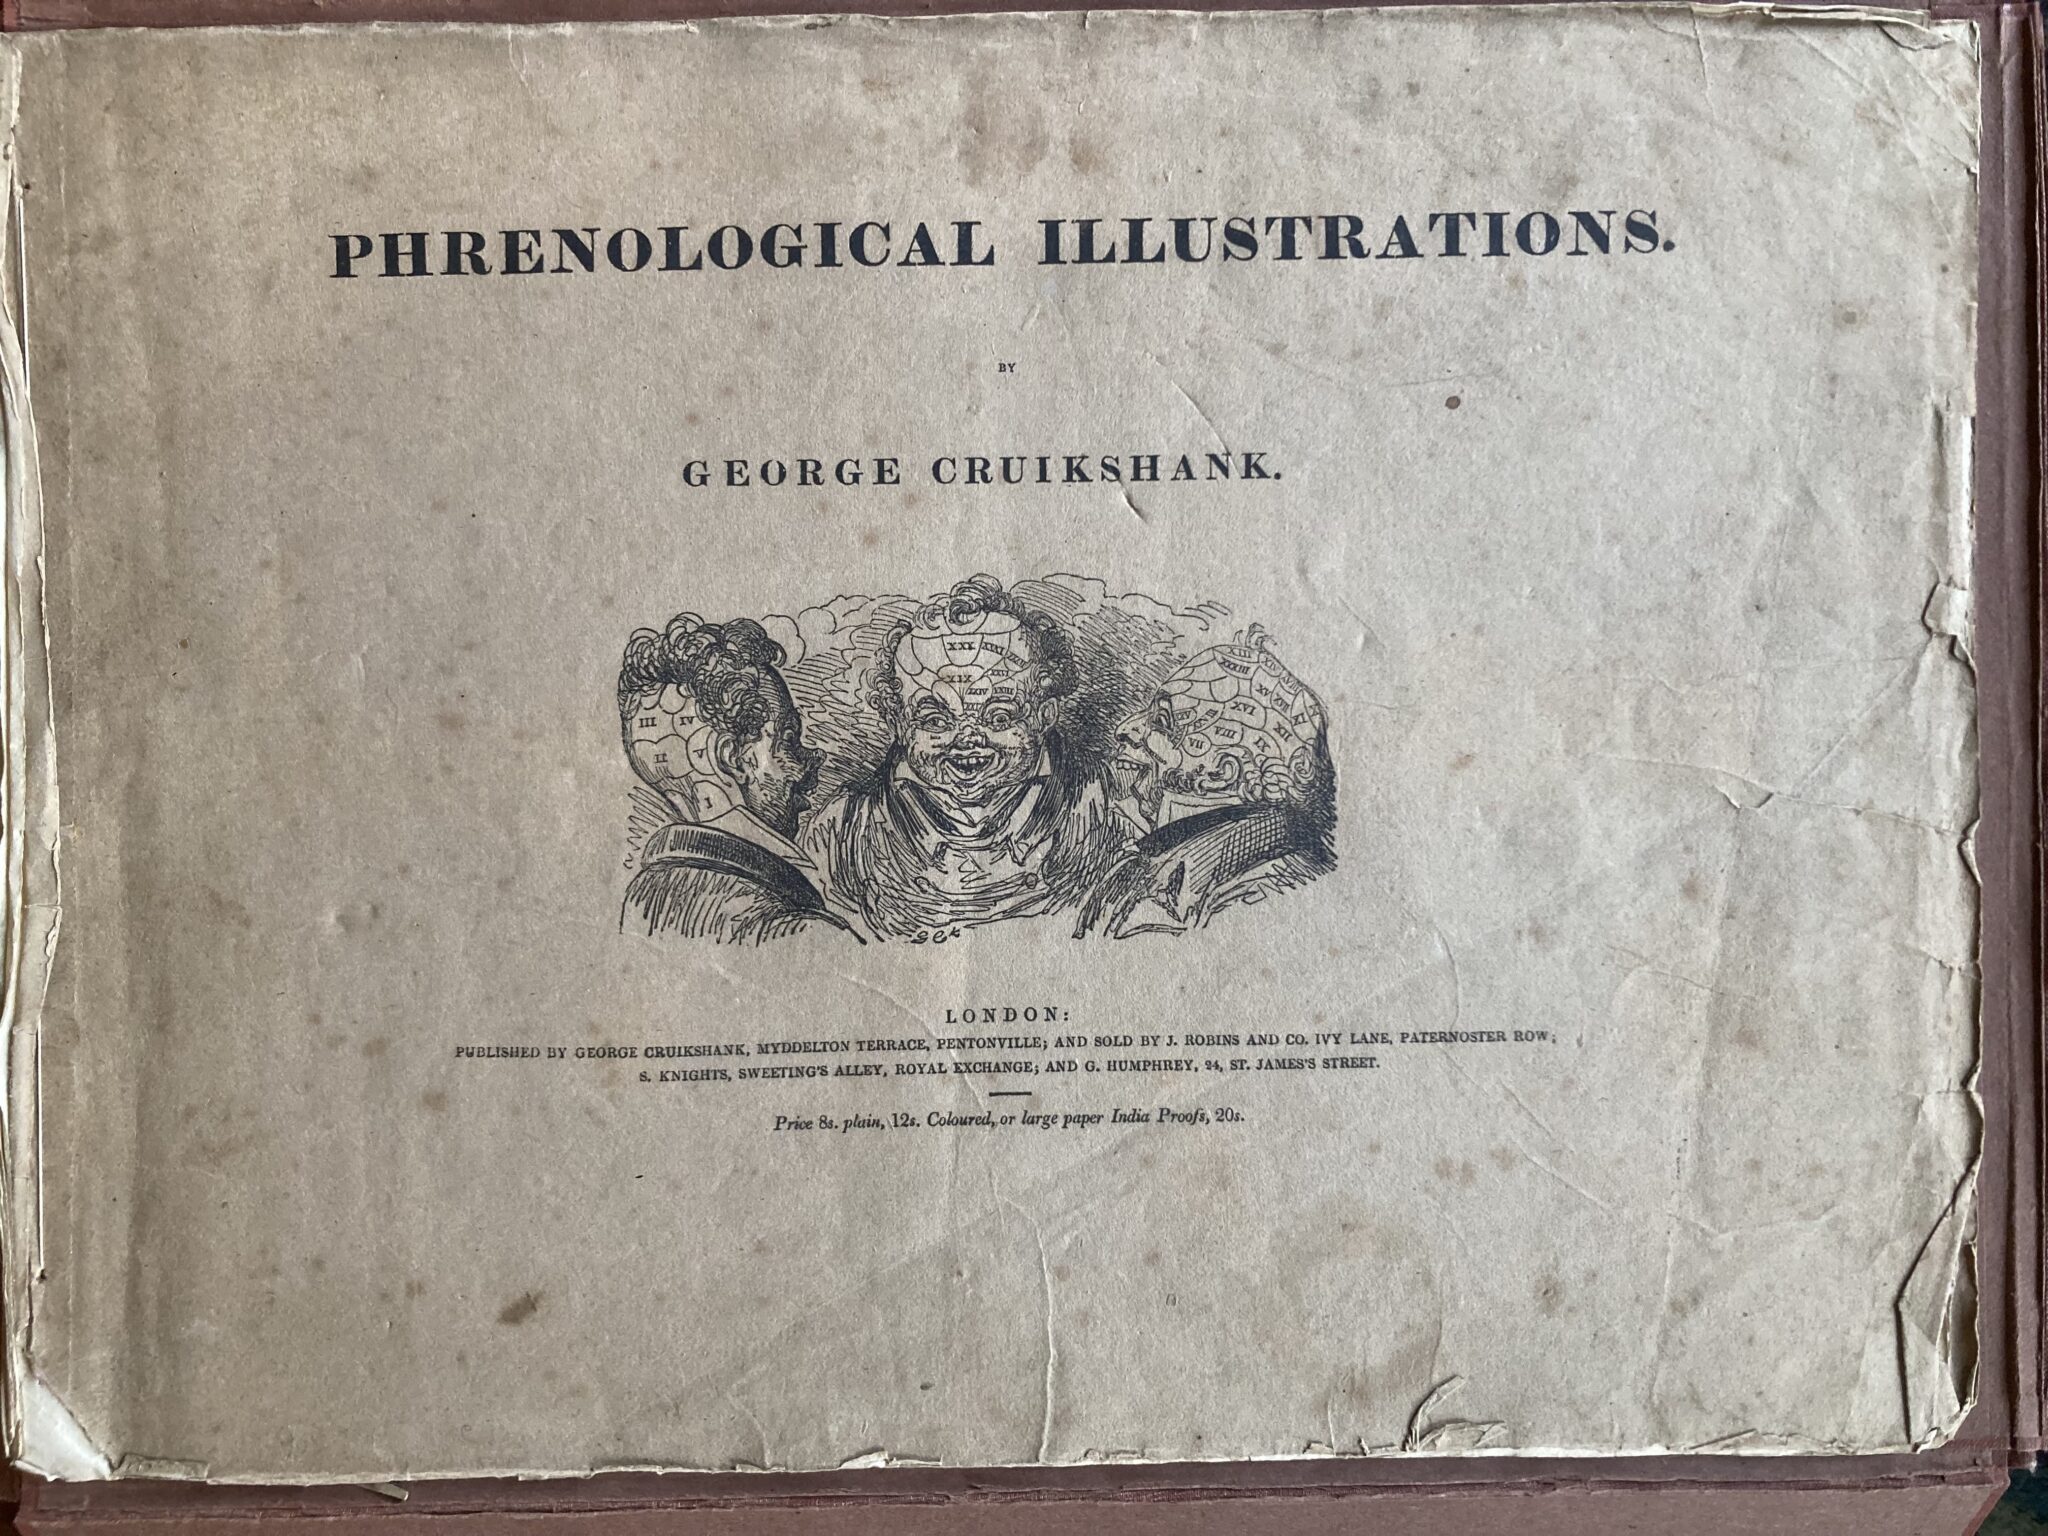 A Large Format Book of ‘Phrenological Illustrations’ by George Cruikshank dated 1826